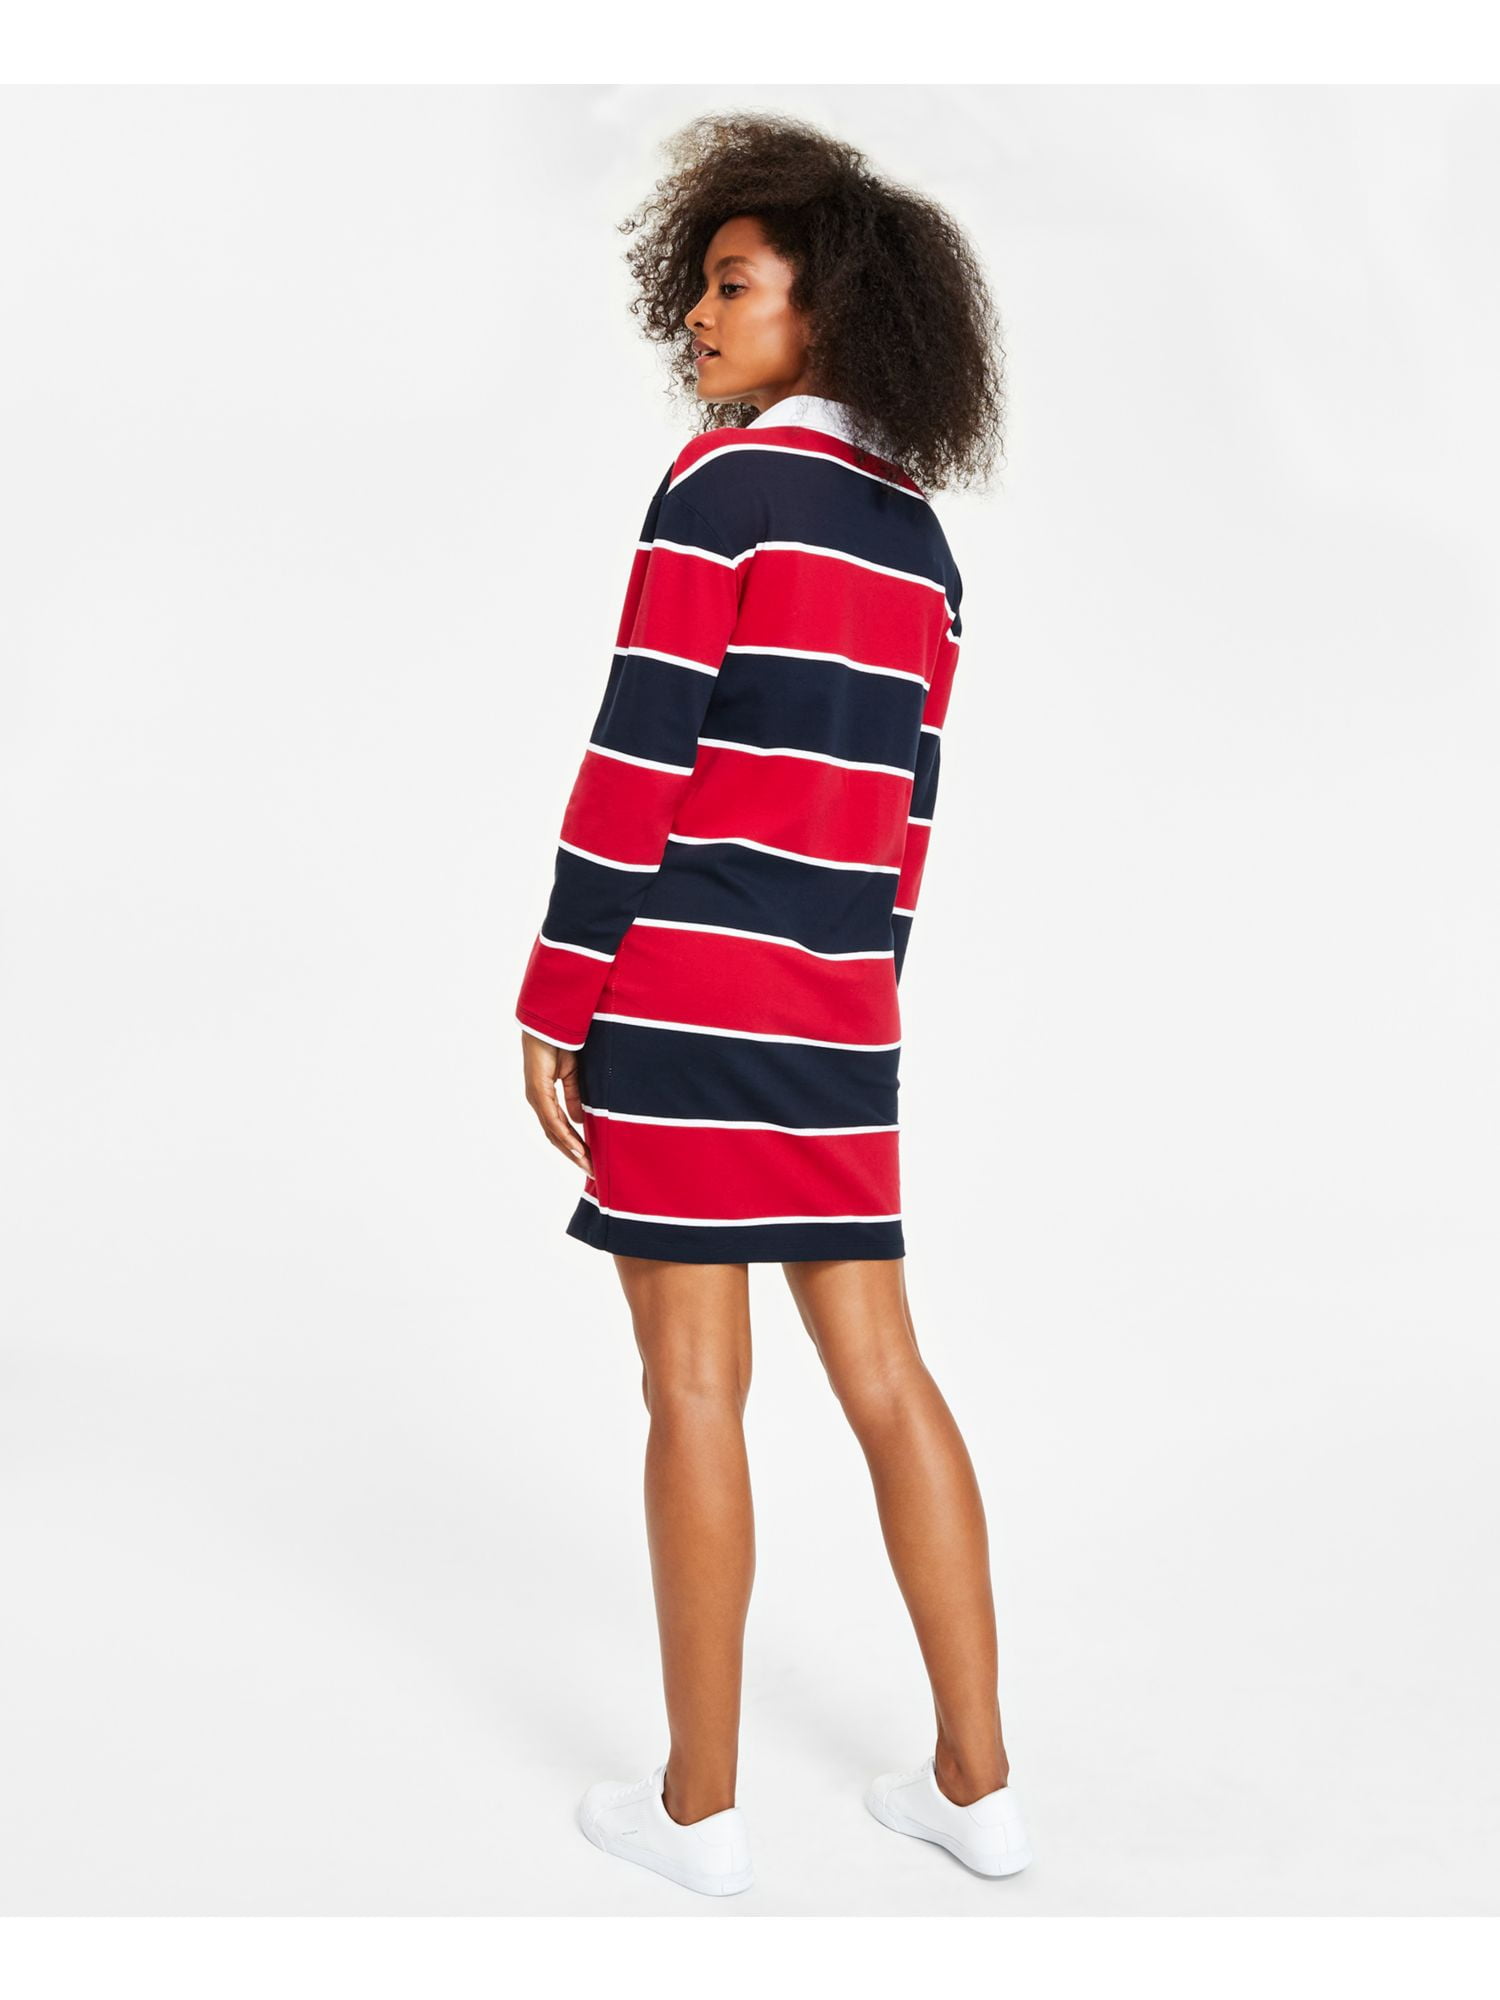 Tommy Hilfiger Women's Adaptive Striped Button Down Dress with Hook and Loop  Closures - ShopStyle